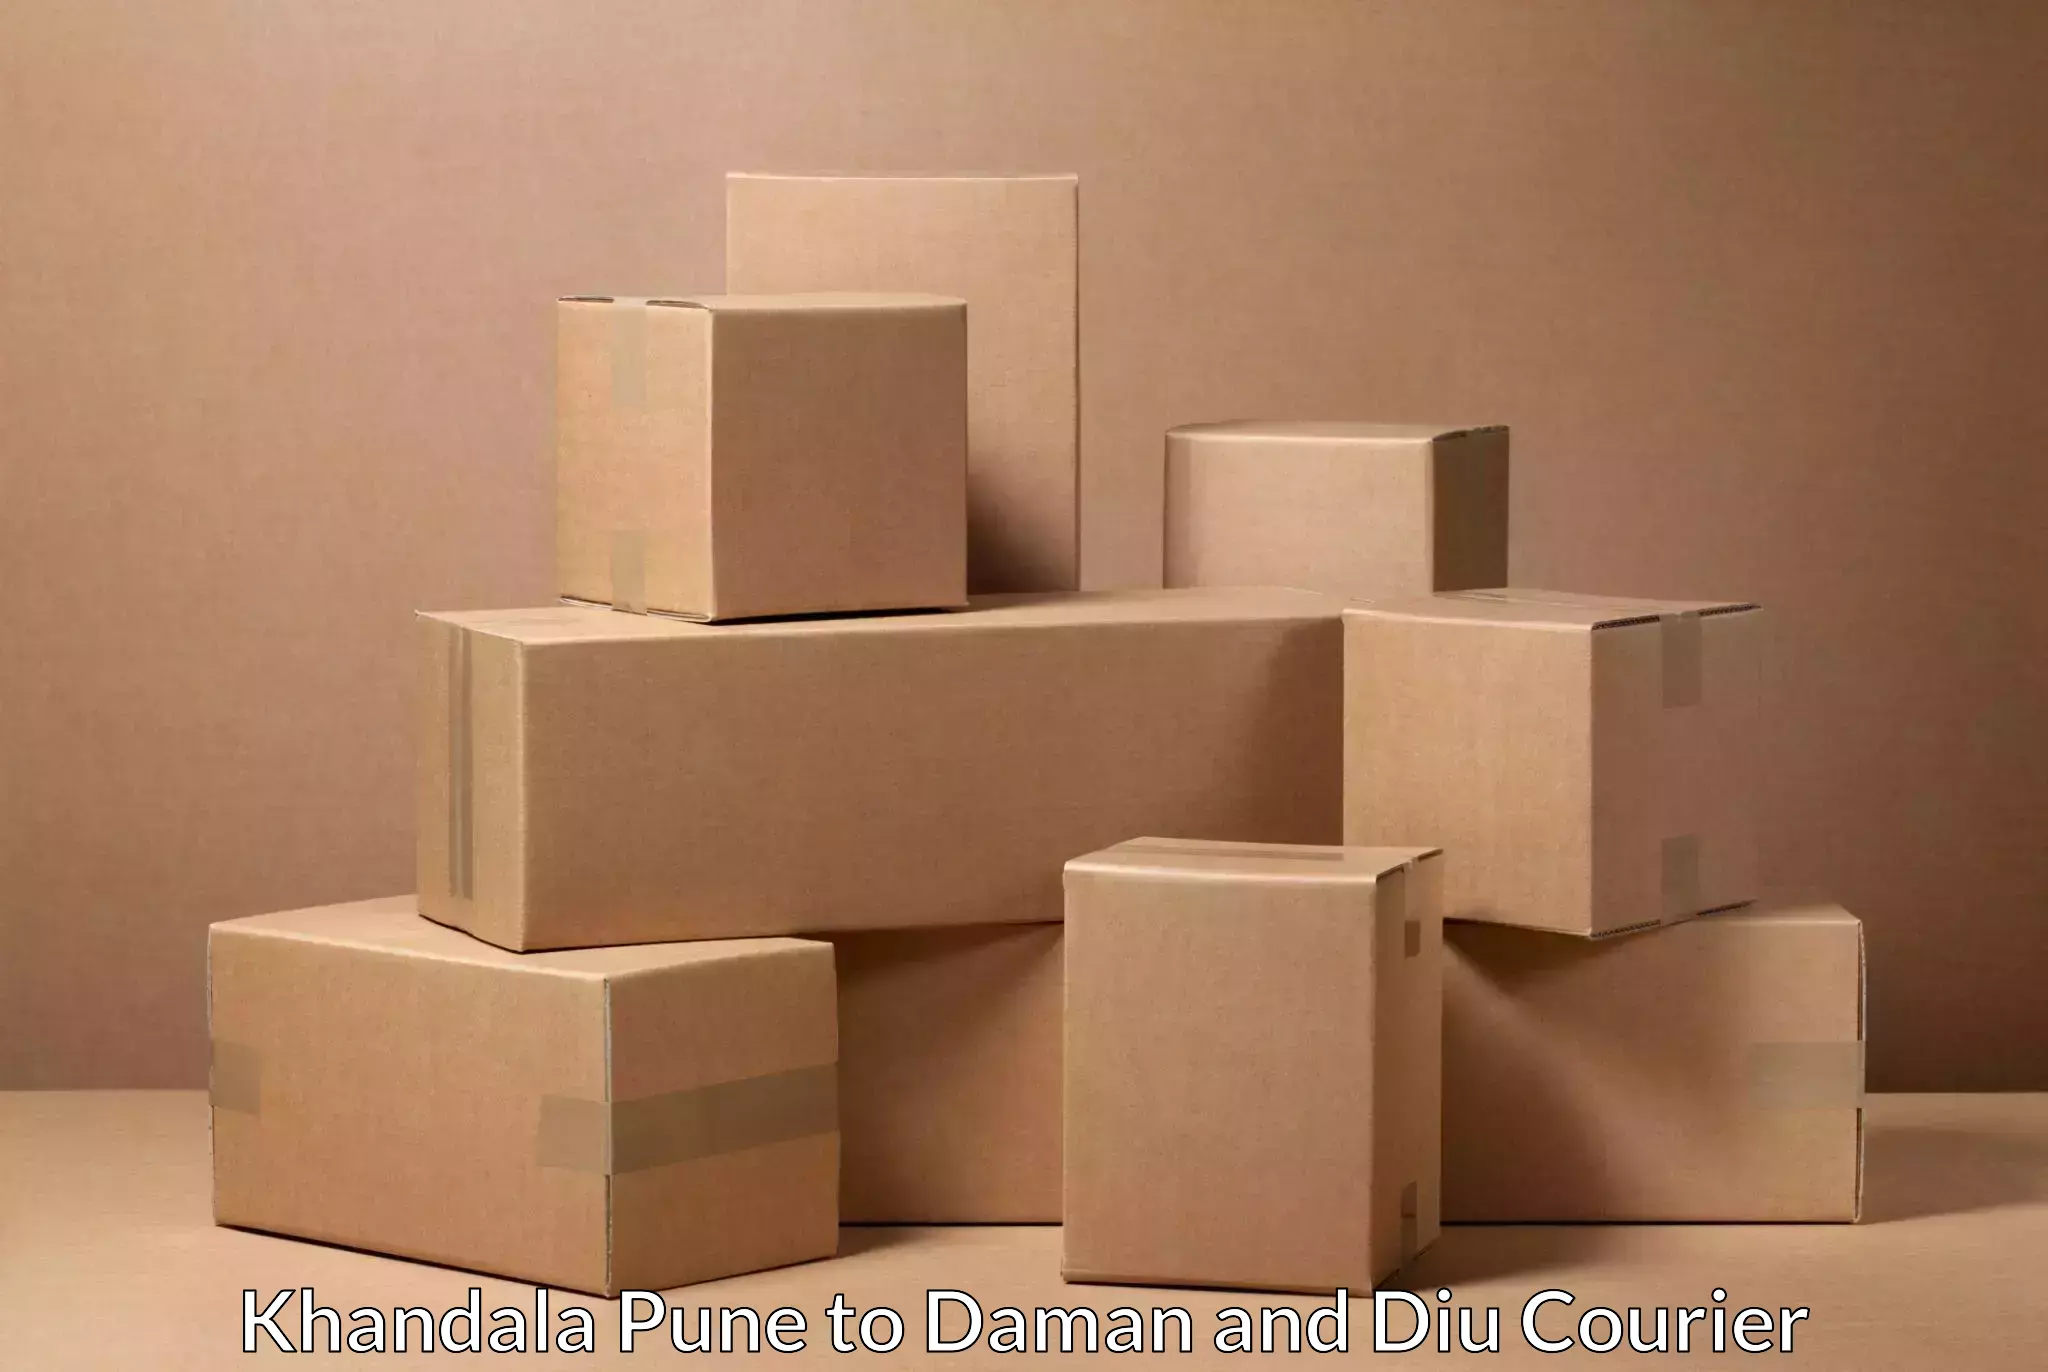 Large package courier Khandala Pune to Daman and Diu